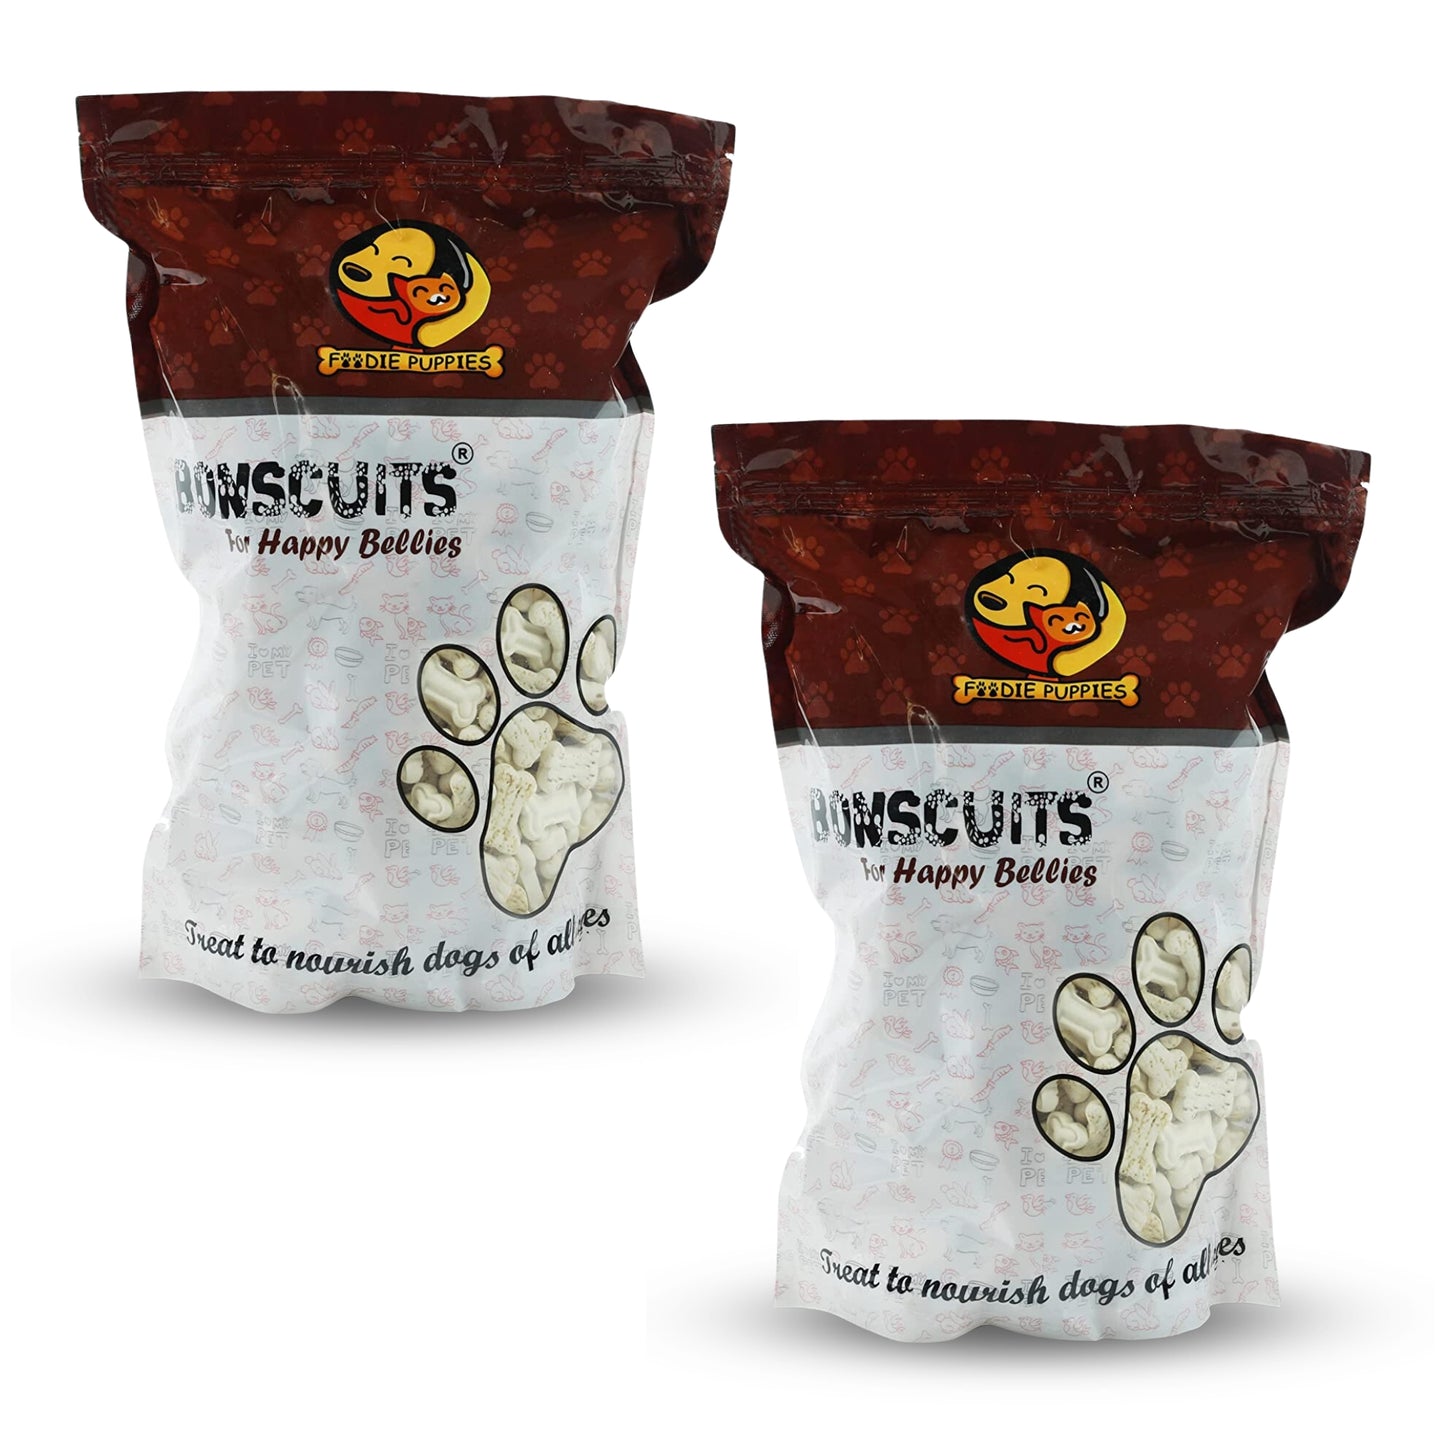 Foodie Puppies Crunchy Milk Biscuits for Dogs & Puppies - 2Kg